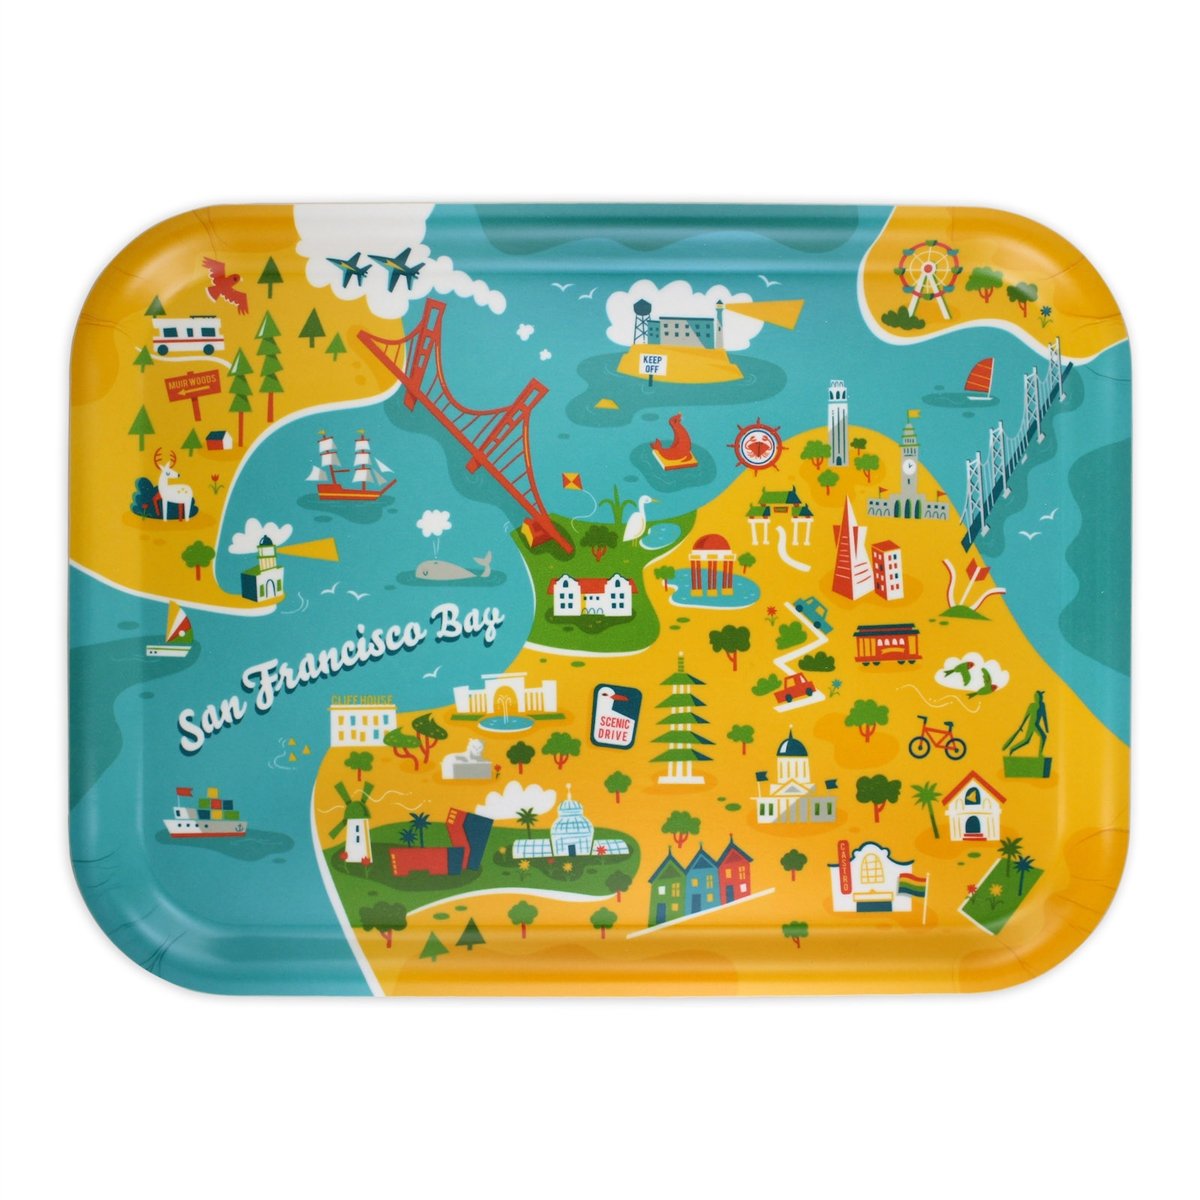 Wooden tray featuring colorful illustrated map of the San Francisco Bay Area's famous landmarks.